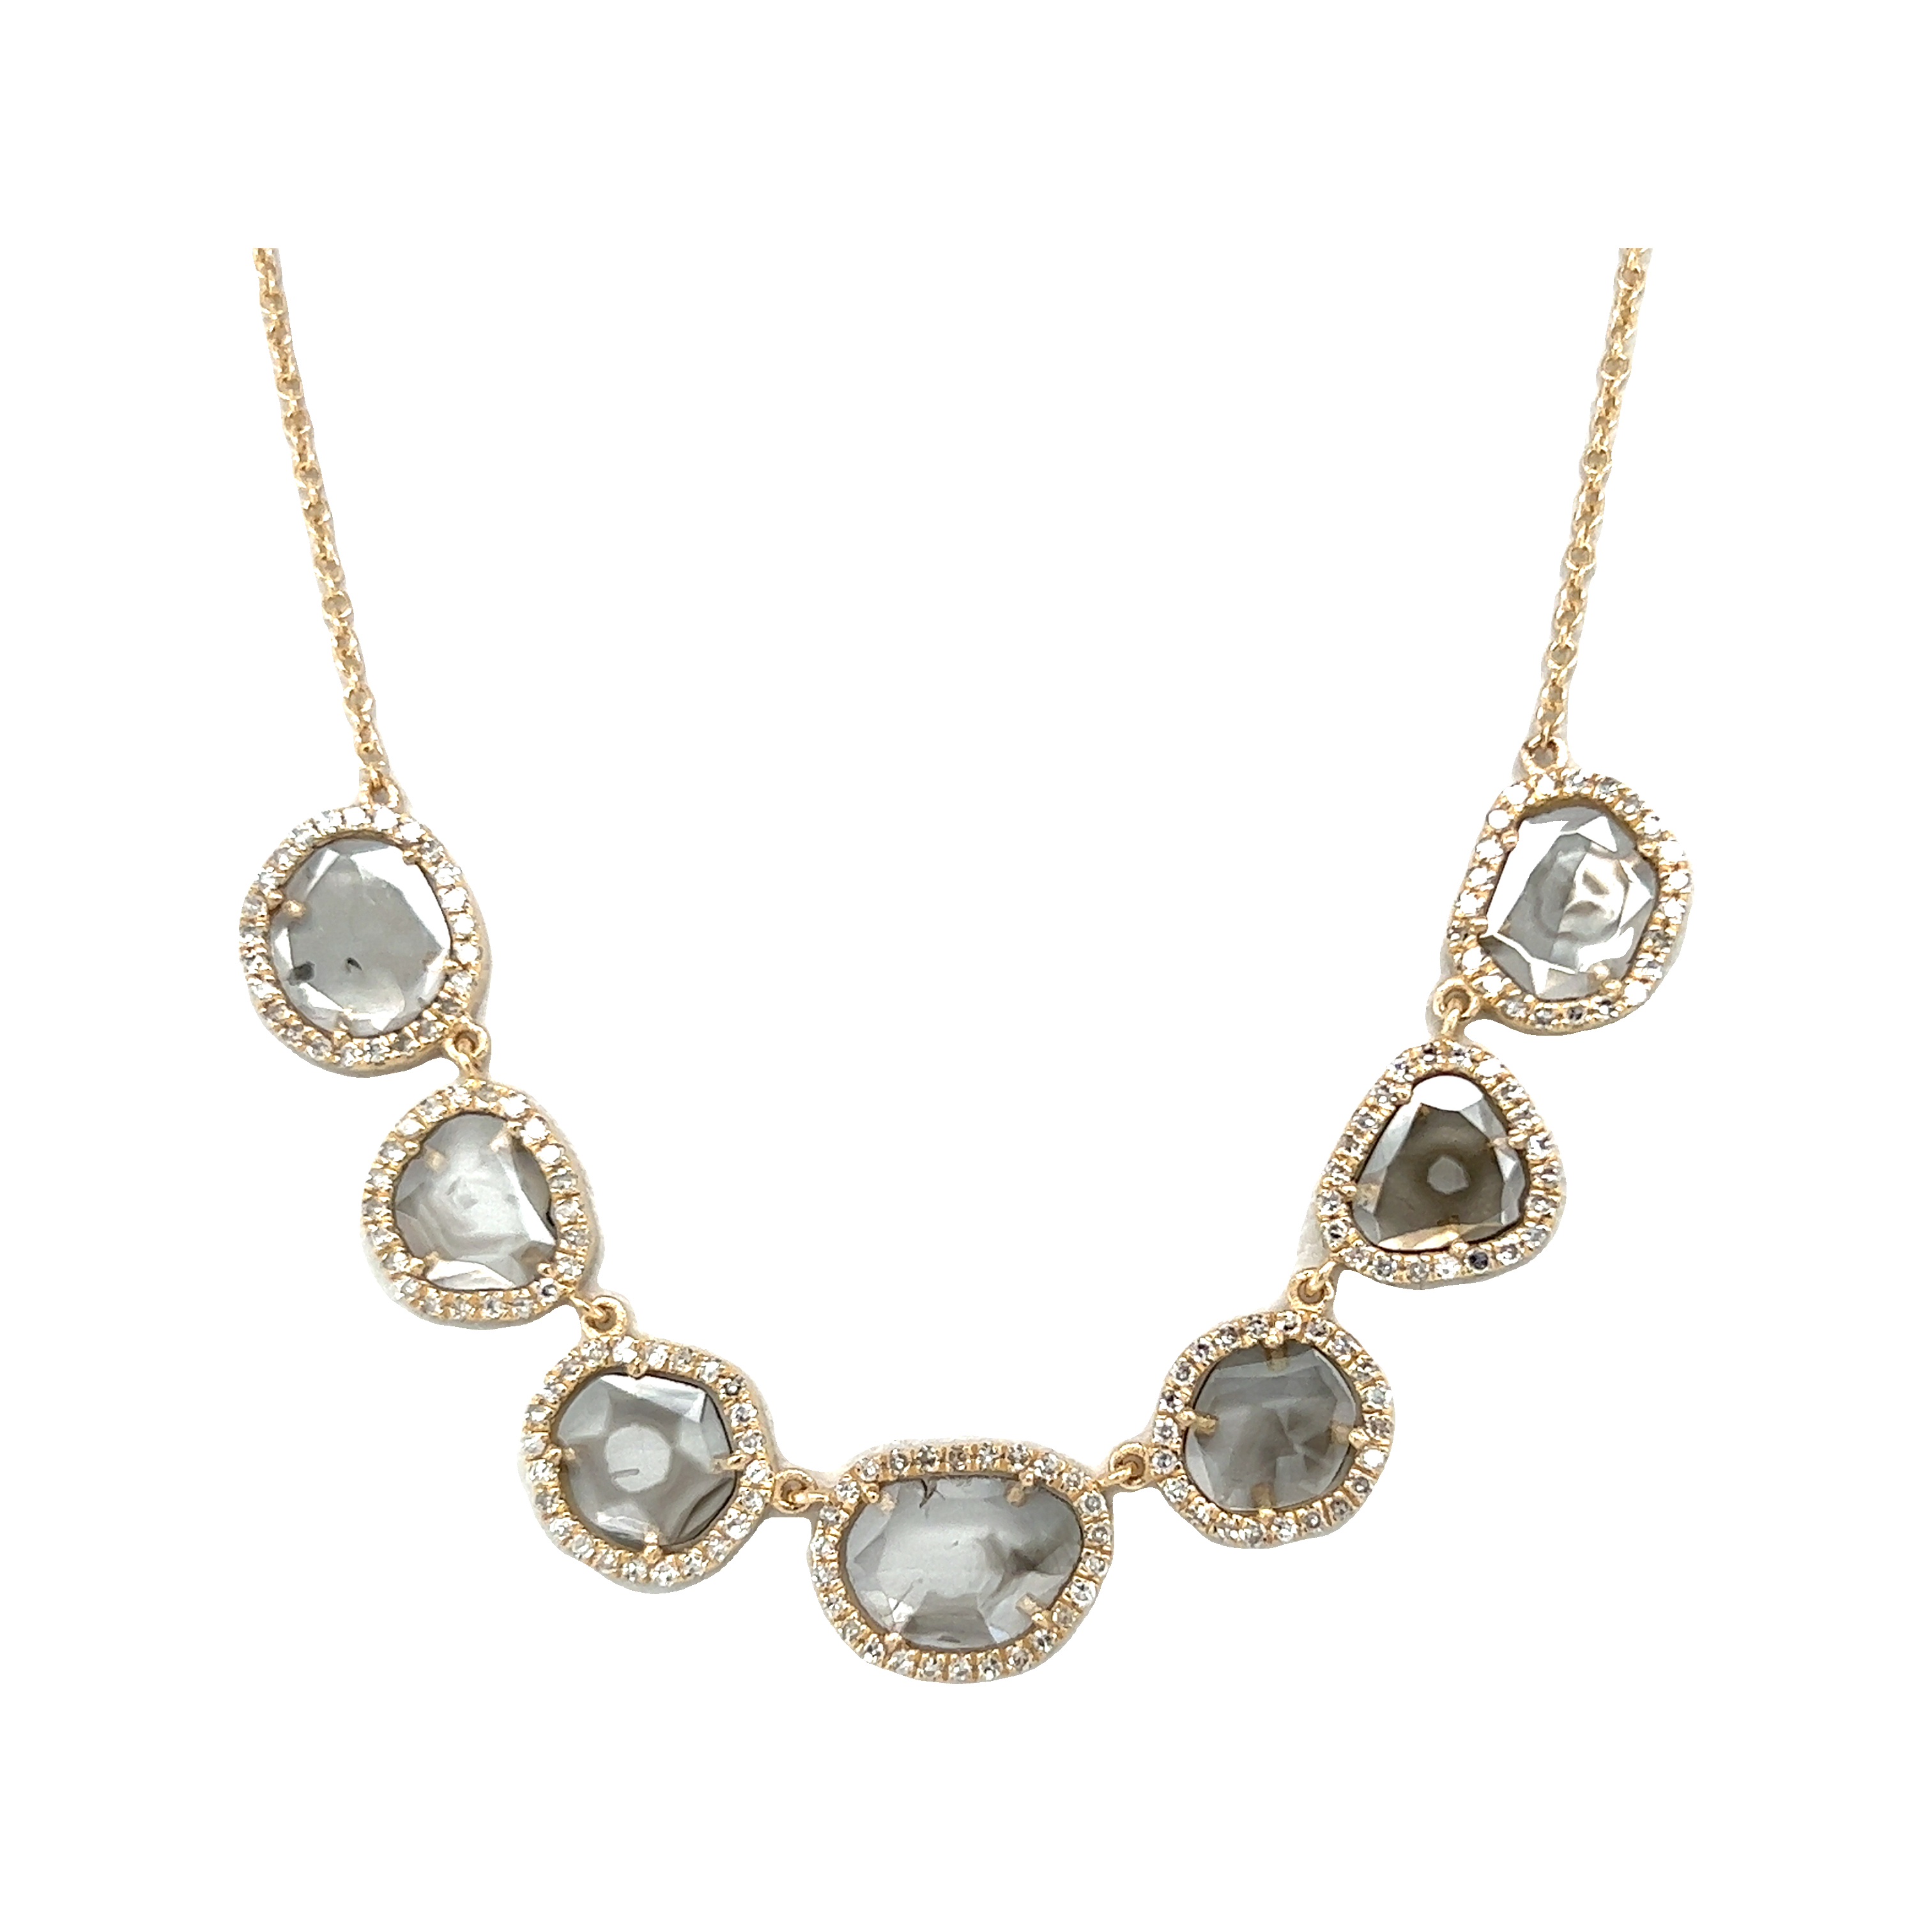 Featured image for “Champagne Diamond 7 Slices Necklace”